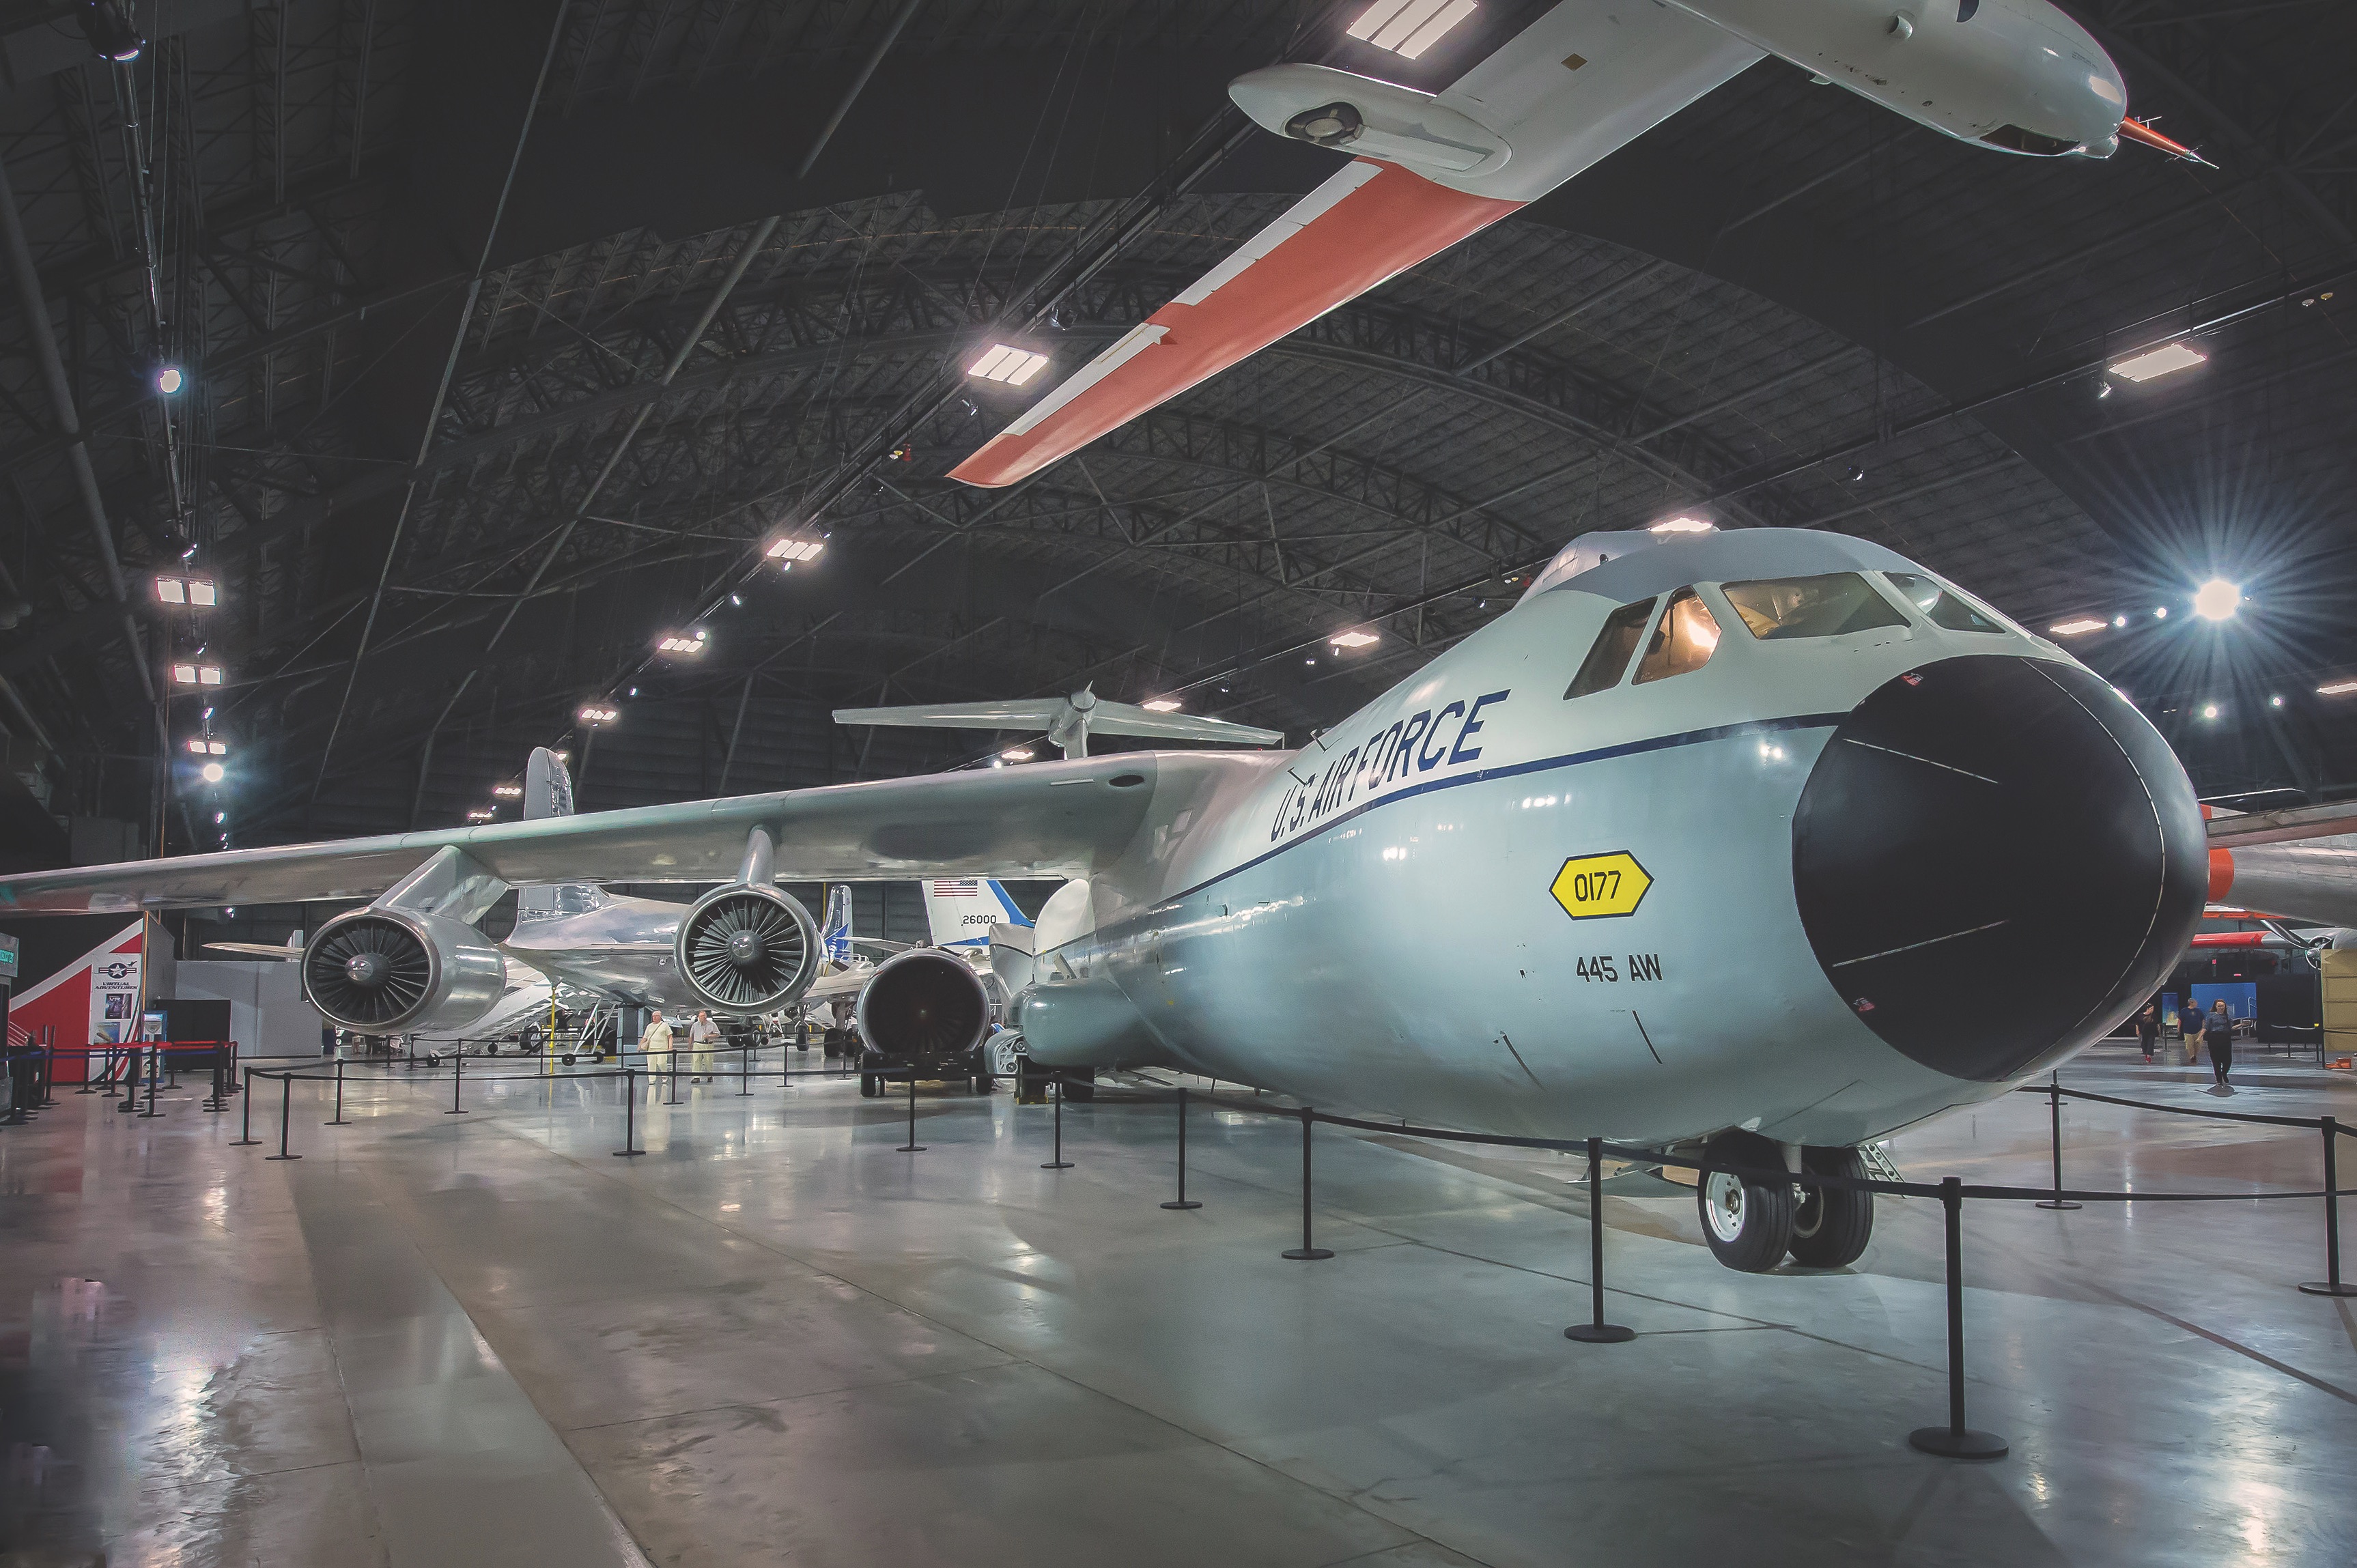 The aircraft that was used to bring Mechenbier from Vietnam in 1973 and take him back in 2004 is now on display at the National Museum of the U.S. Air Force in Dayton, Ohio. / U.S. Air Force, Jim Copes